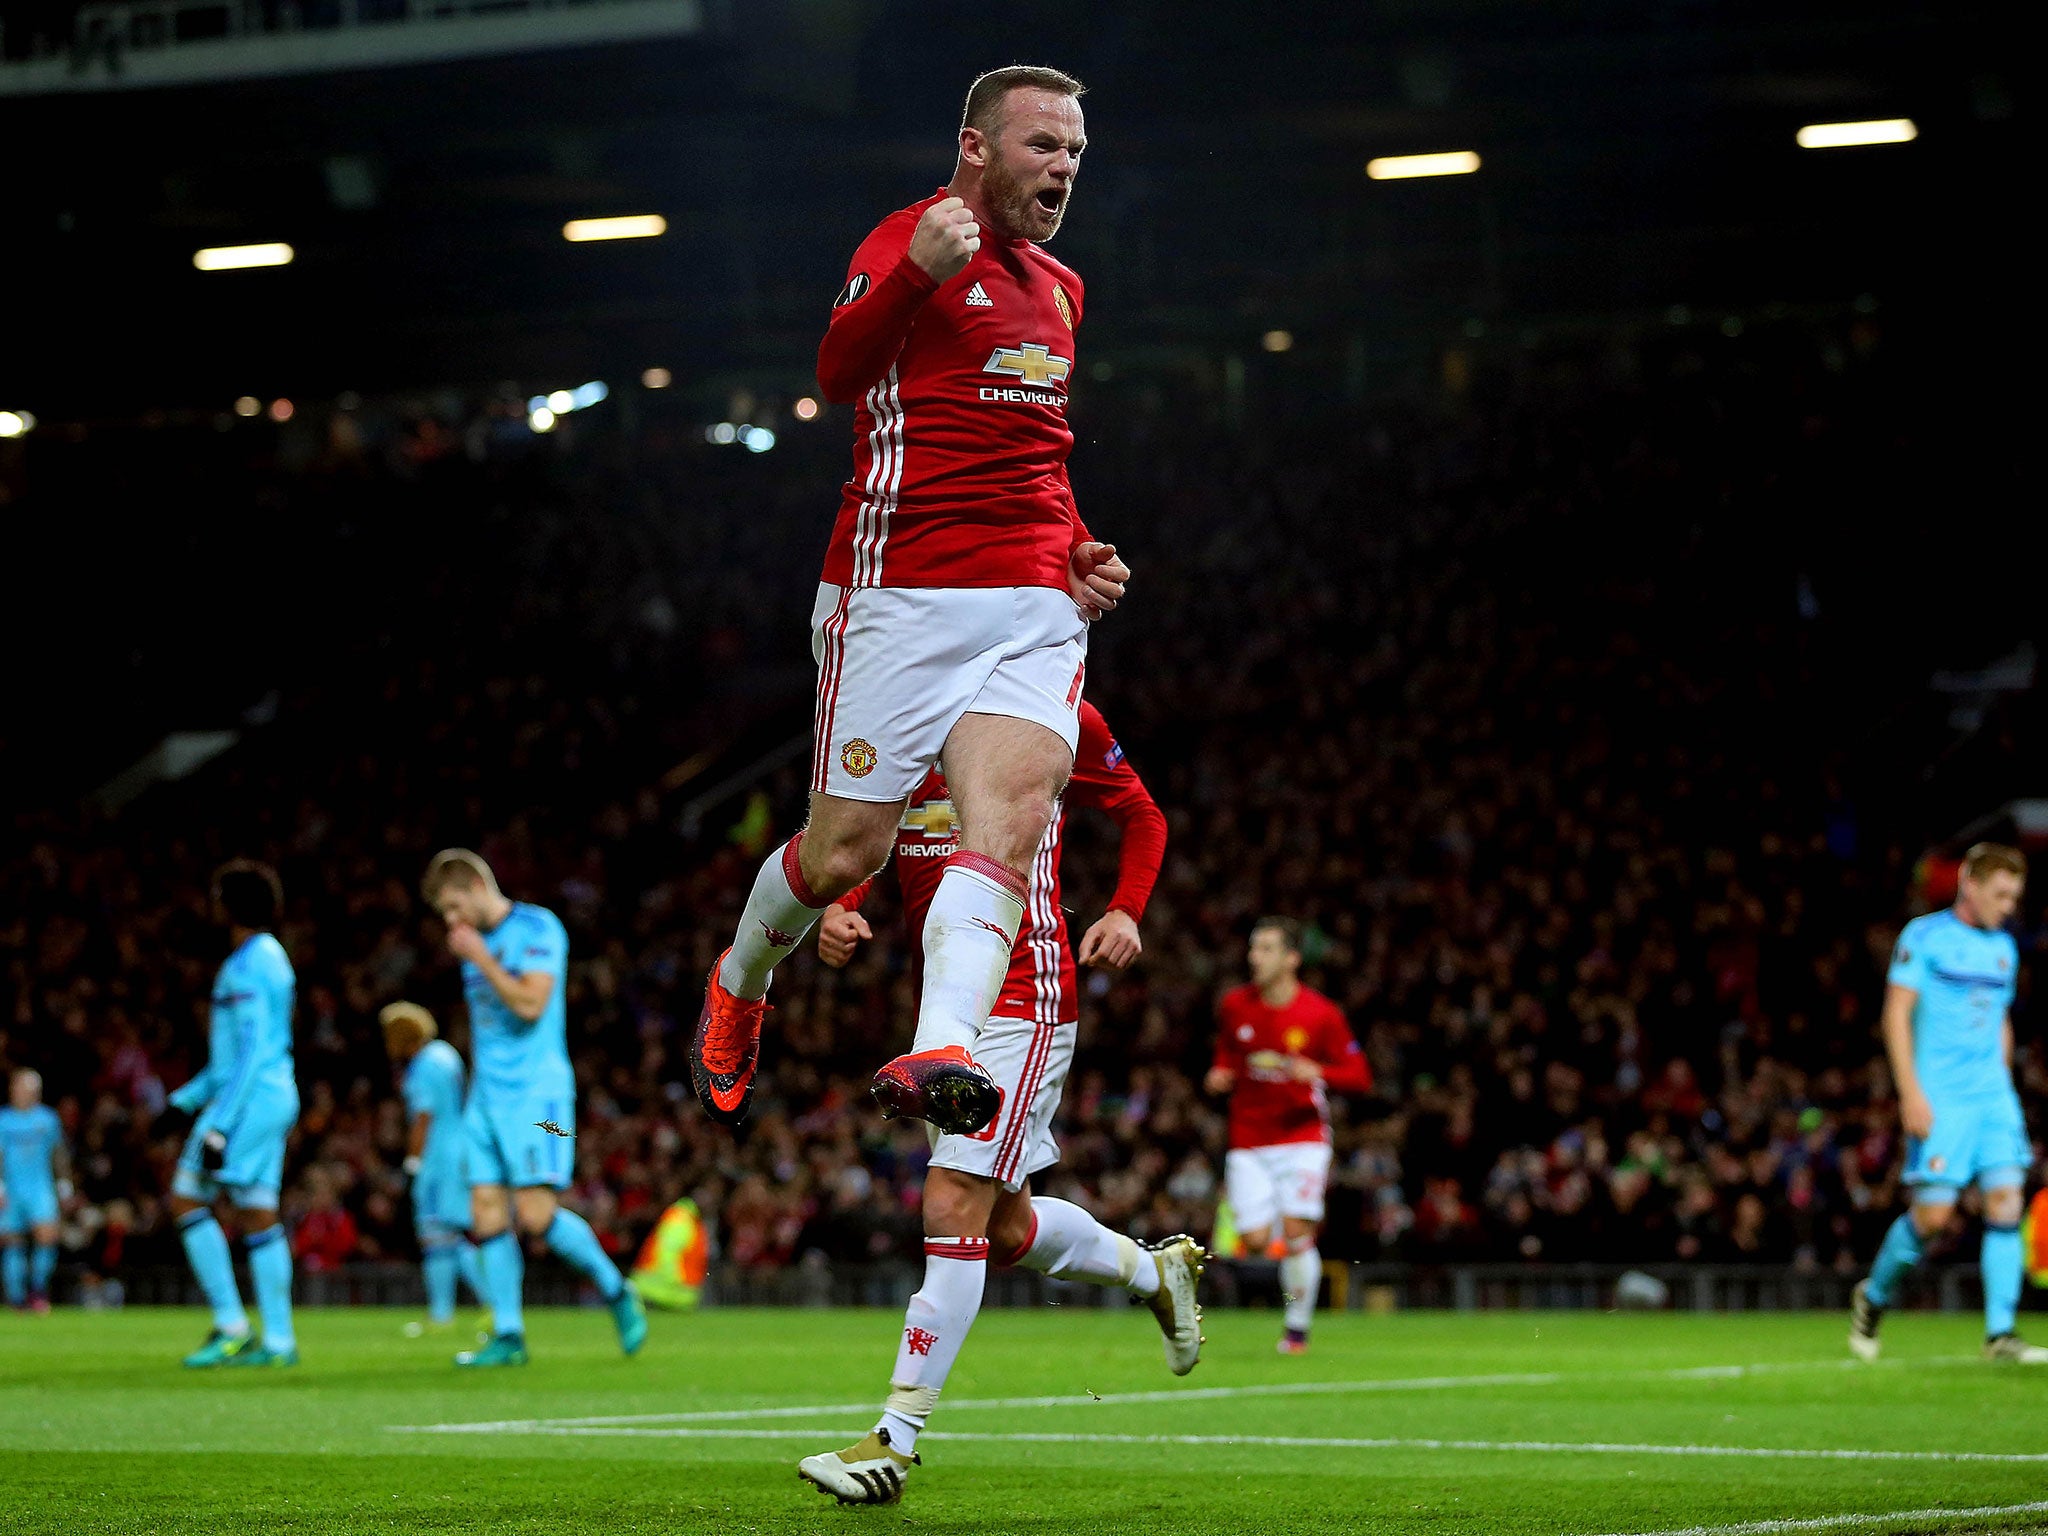 Wayne Rooney celebrates after putting United ahead in the 35th minute